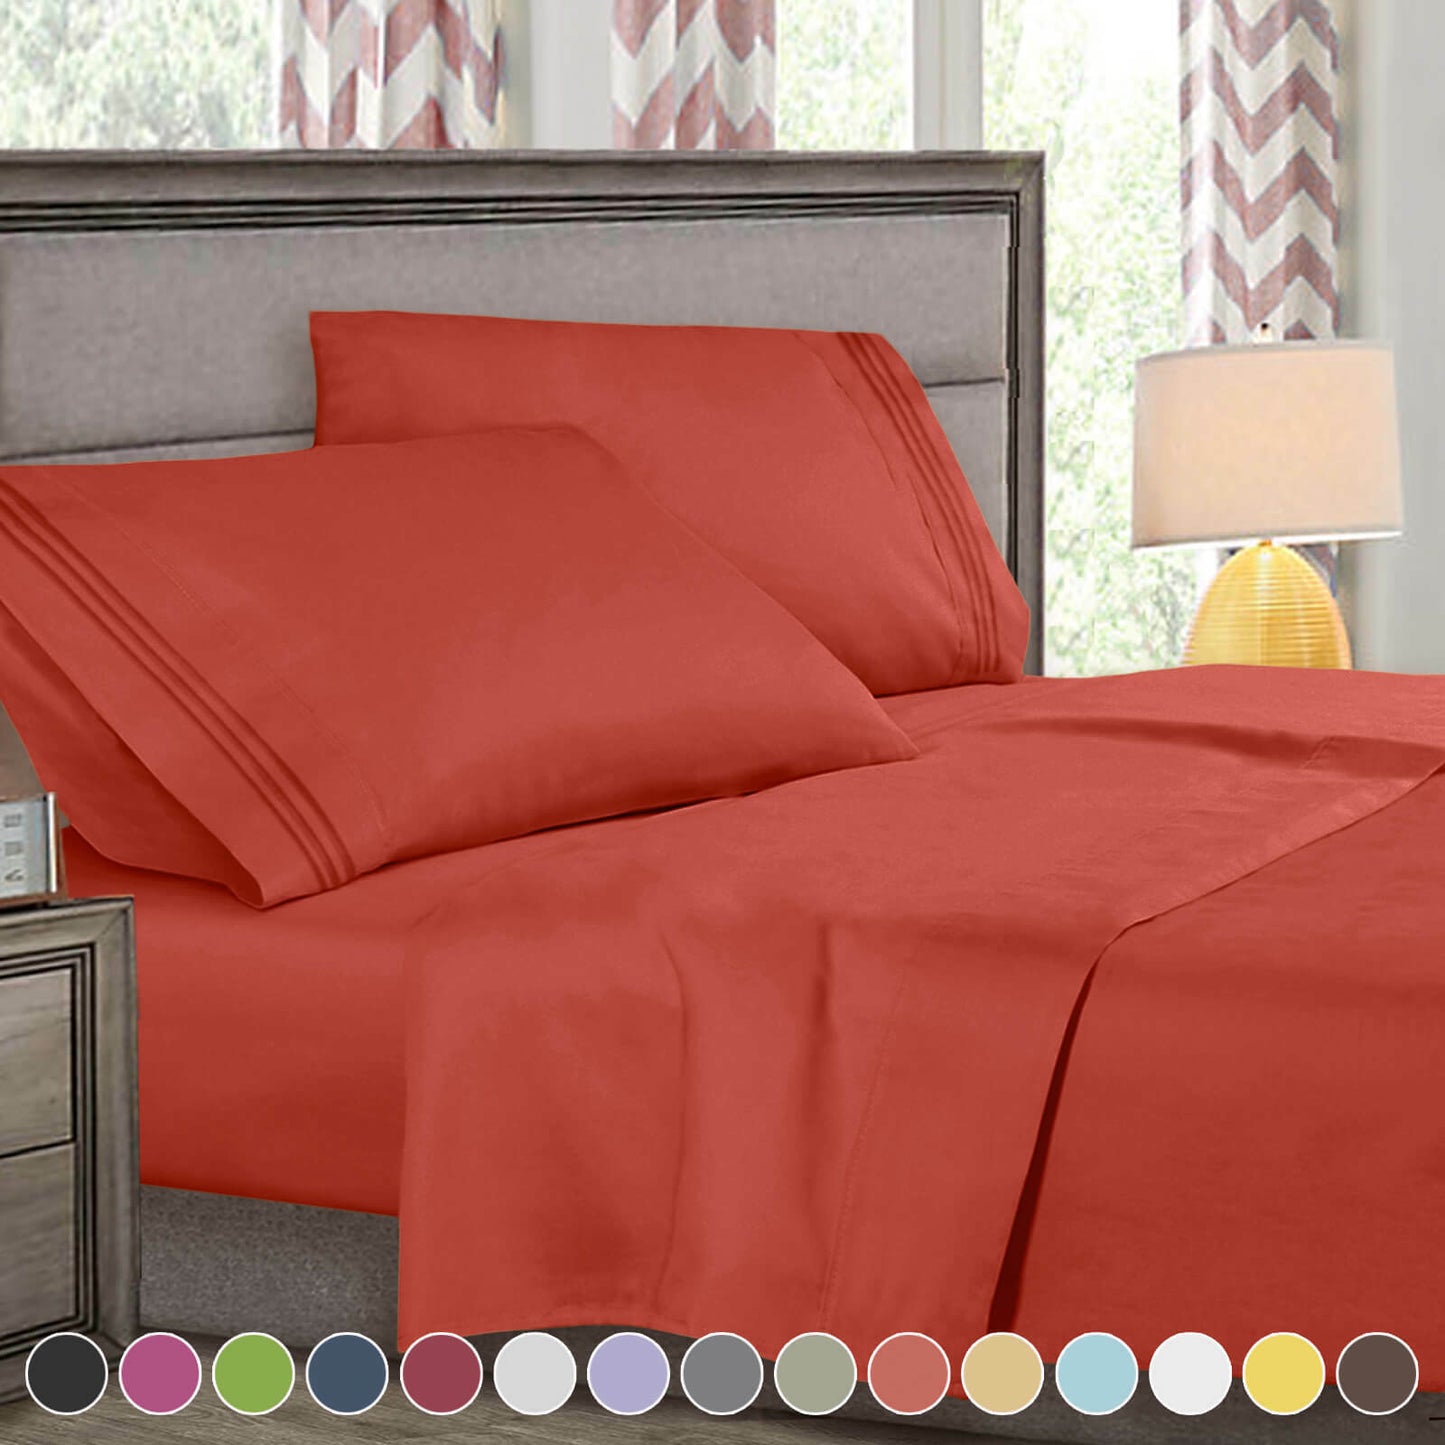 Bed Sheets - 4-Piece Deep Pocket Bed Sheet Set - 1800 Collection Hotel Quality - Twin / Orange